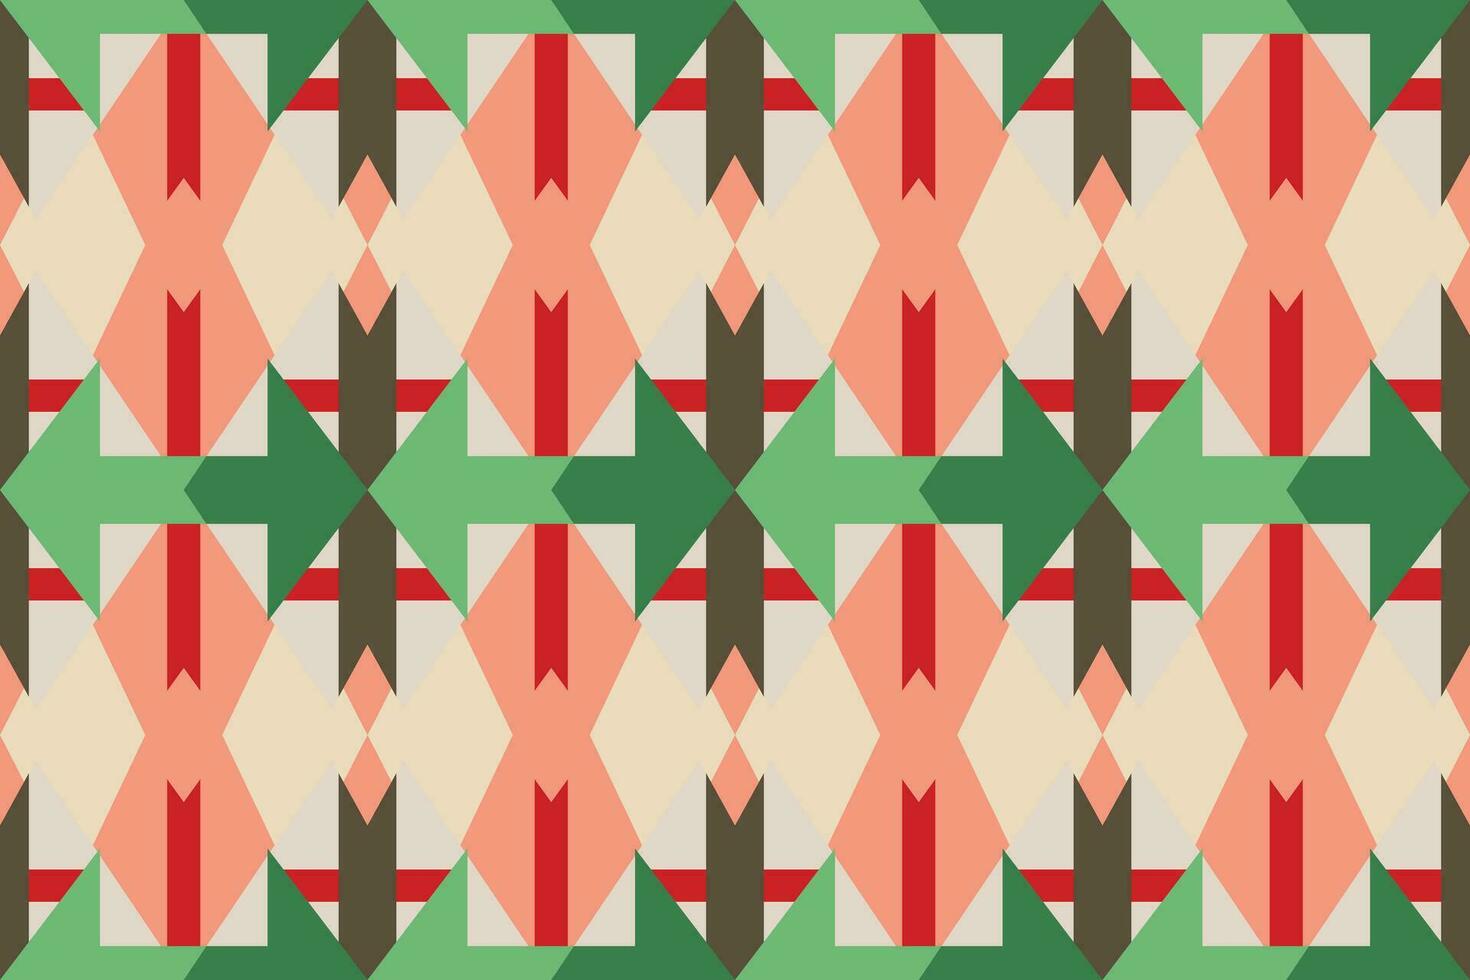 Seamless Pattern Vector Illustration.This captivating design combines intricate geometric shapes and soothing color palettes to create a mesmerizing visual feast that's perfect for gift wrapping paper